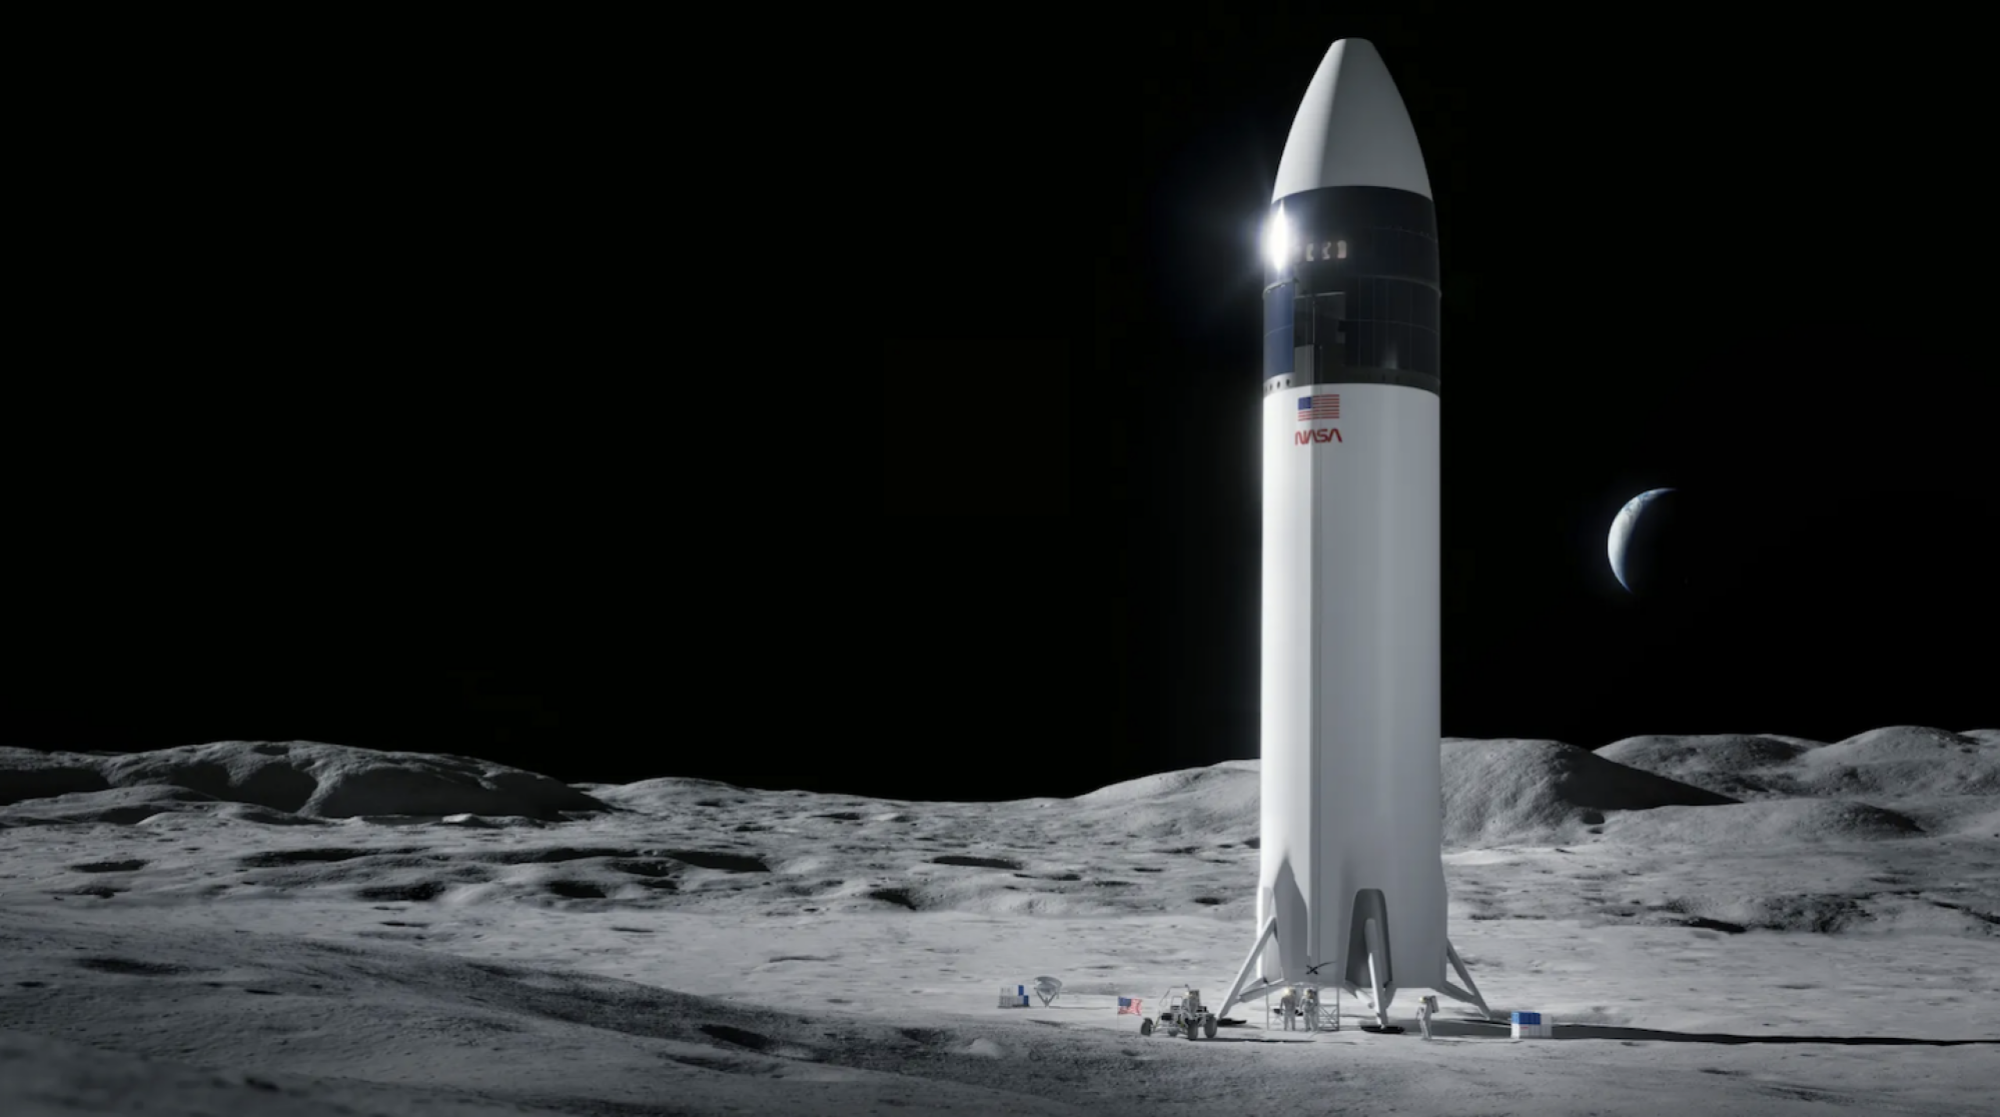 An artist's conception of the SpaceX Starship human lander design.